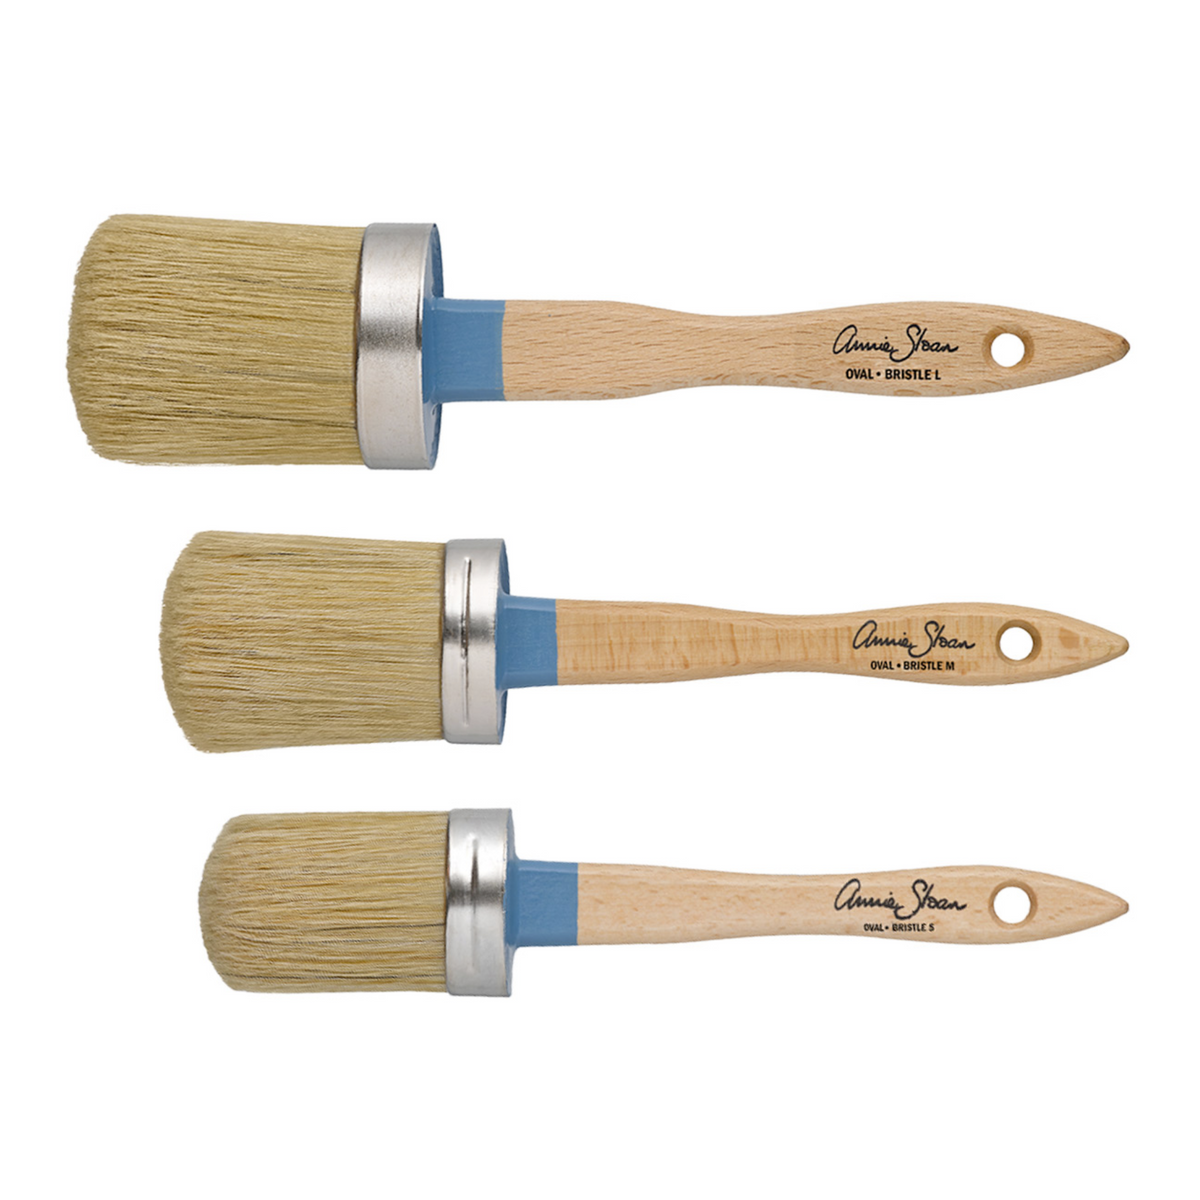 Annie Sloan® Round Brush – Large - Mint by michelle